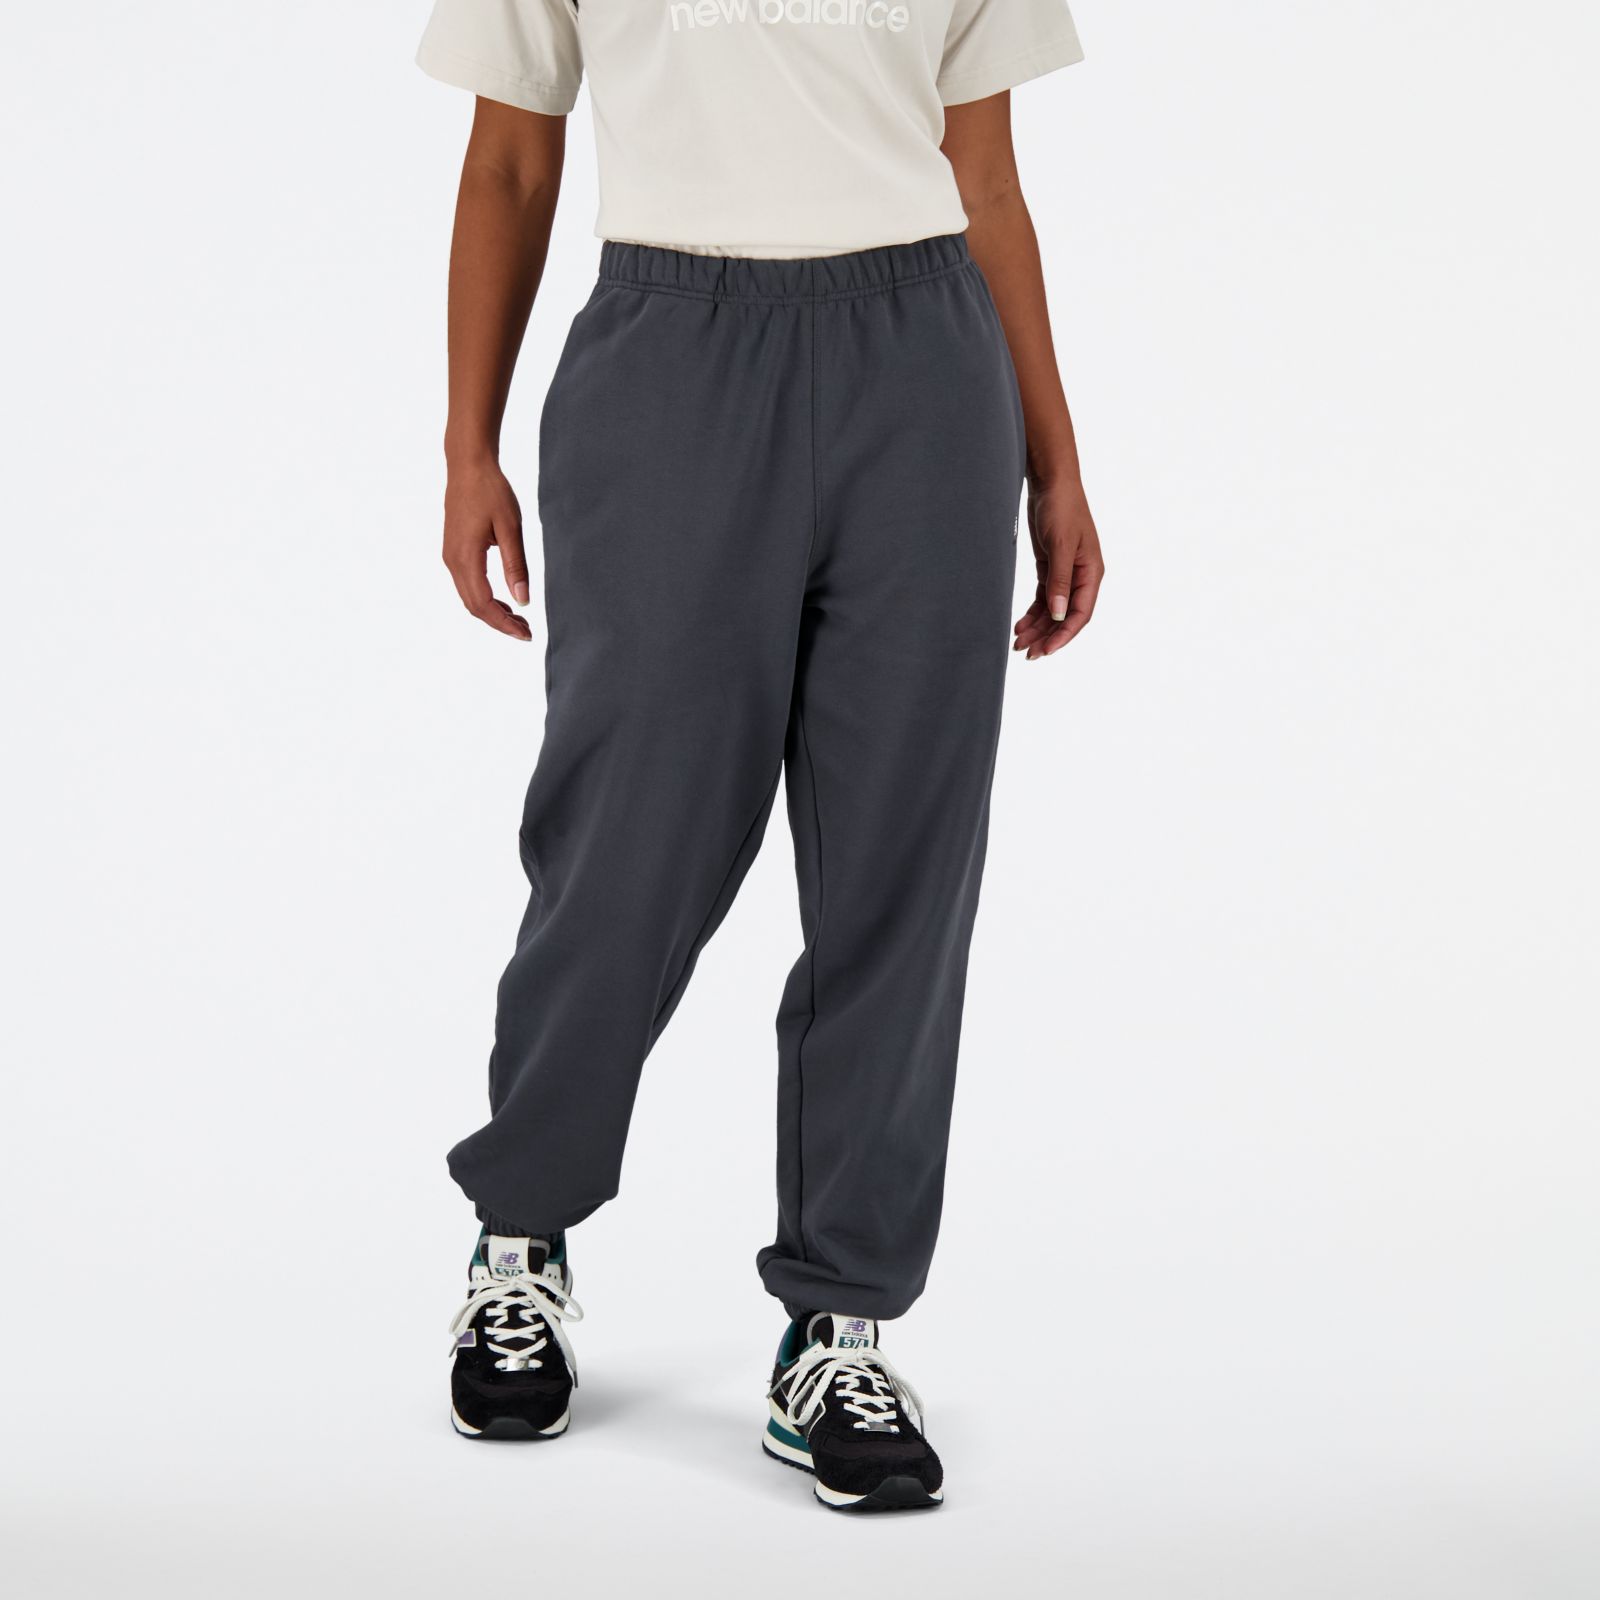 New balance Athletics Remastered French Terry Pants